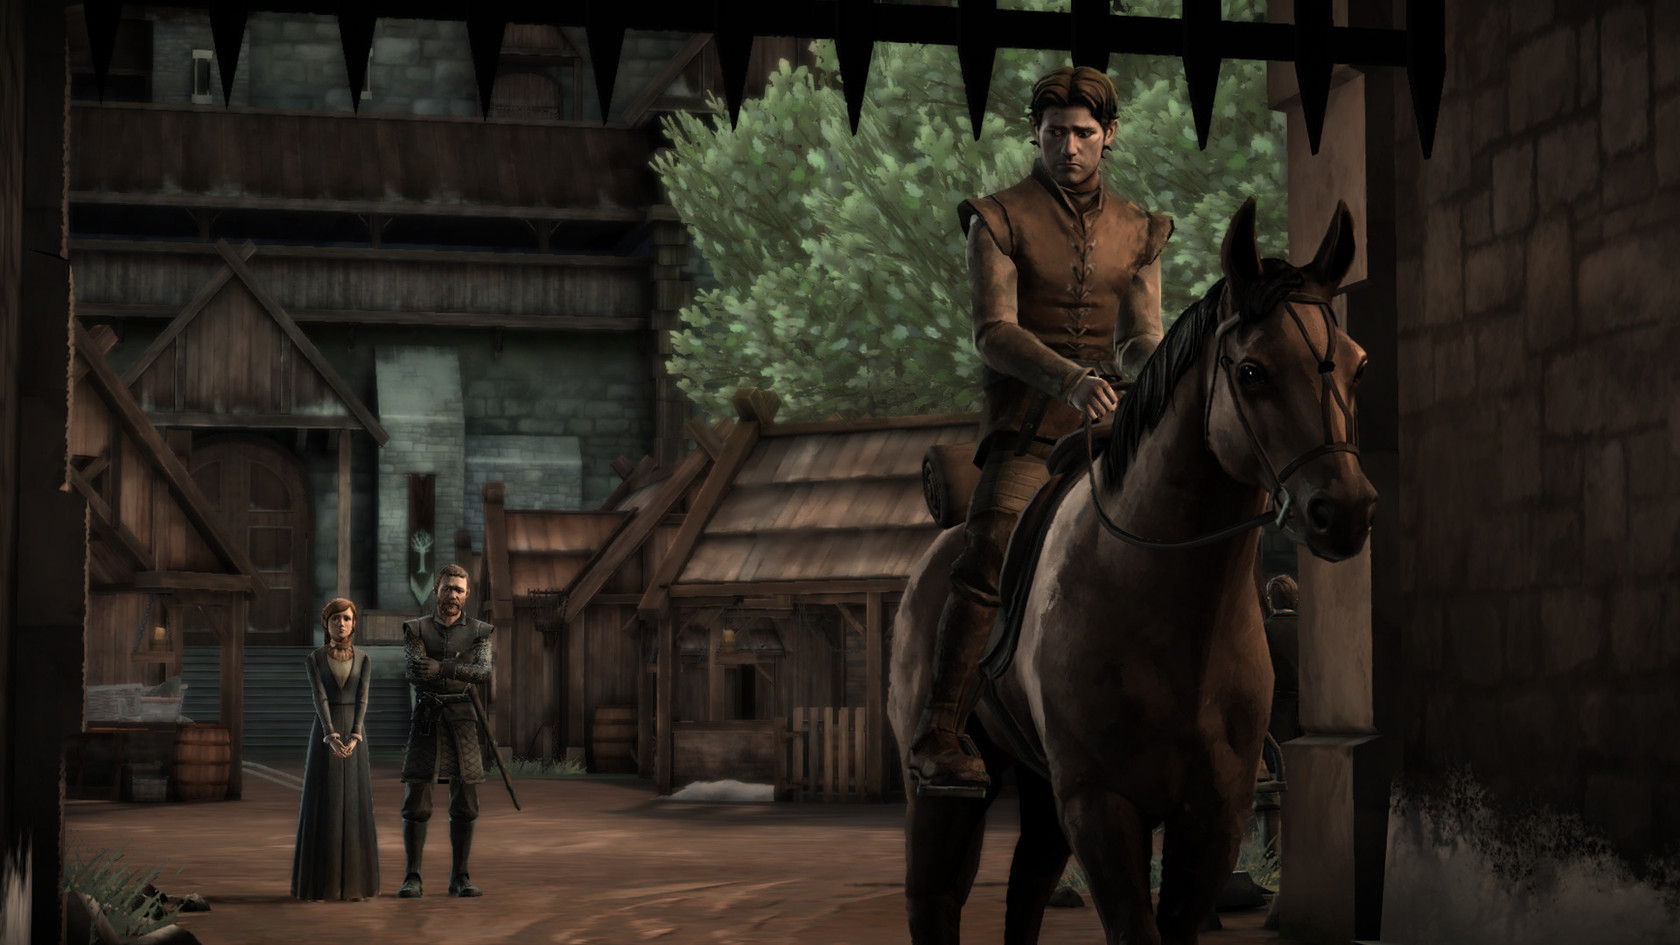 1680x945 > Game Of Thrones - A Telltale Games Series Wallpapers